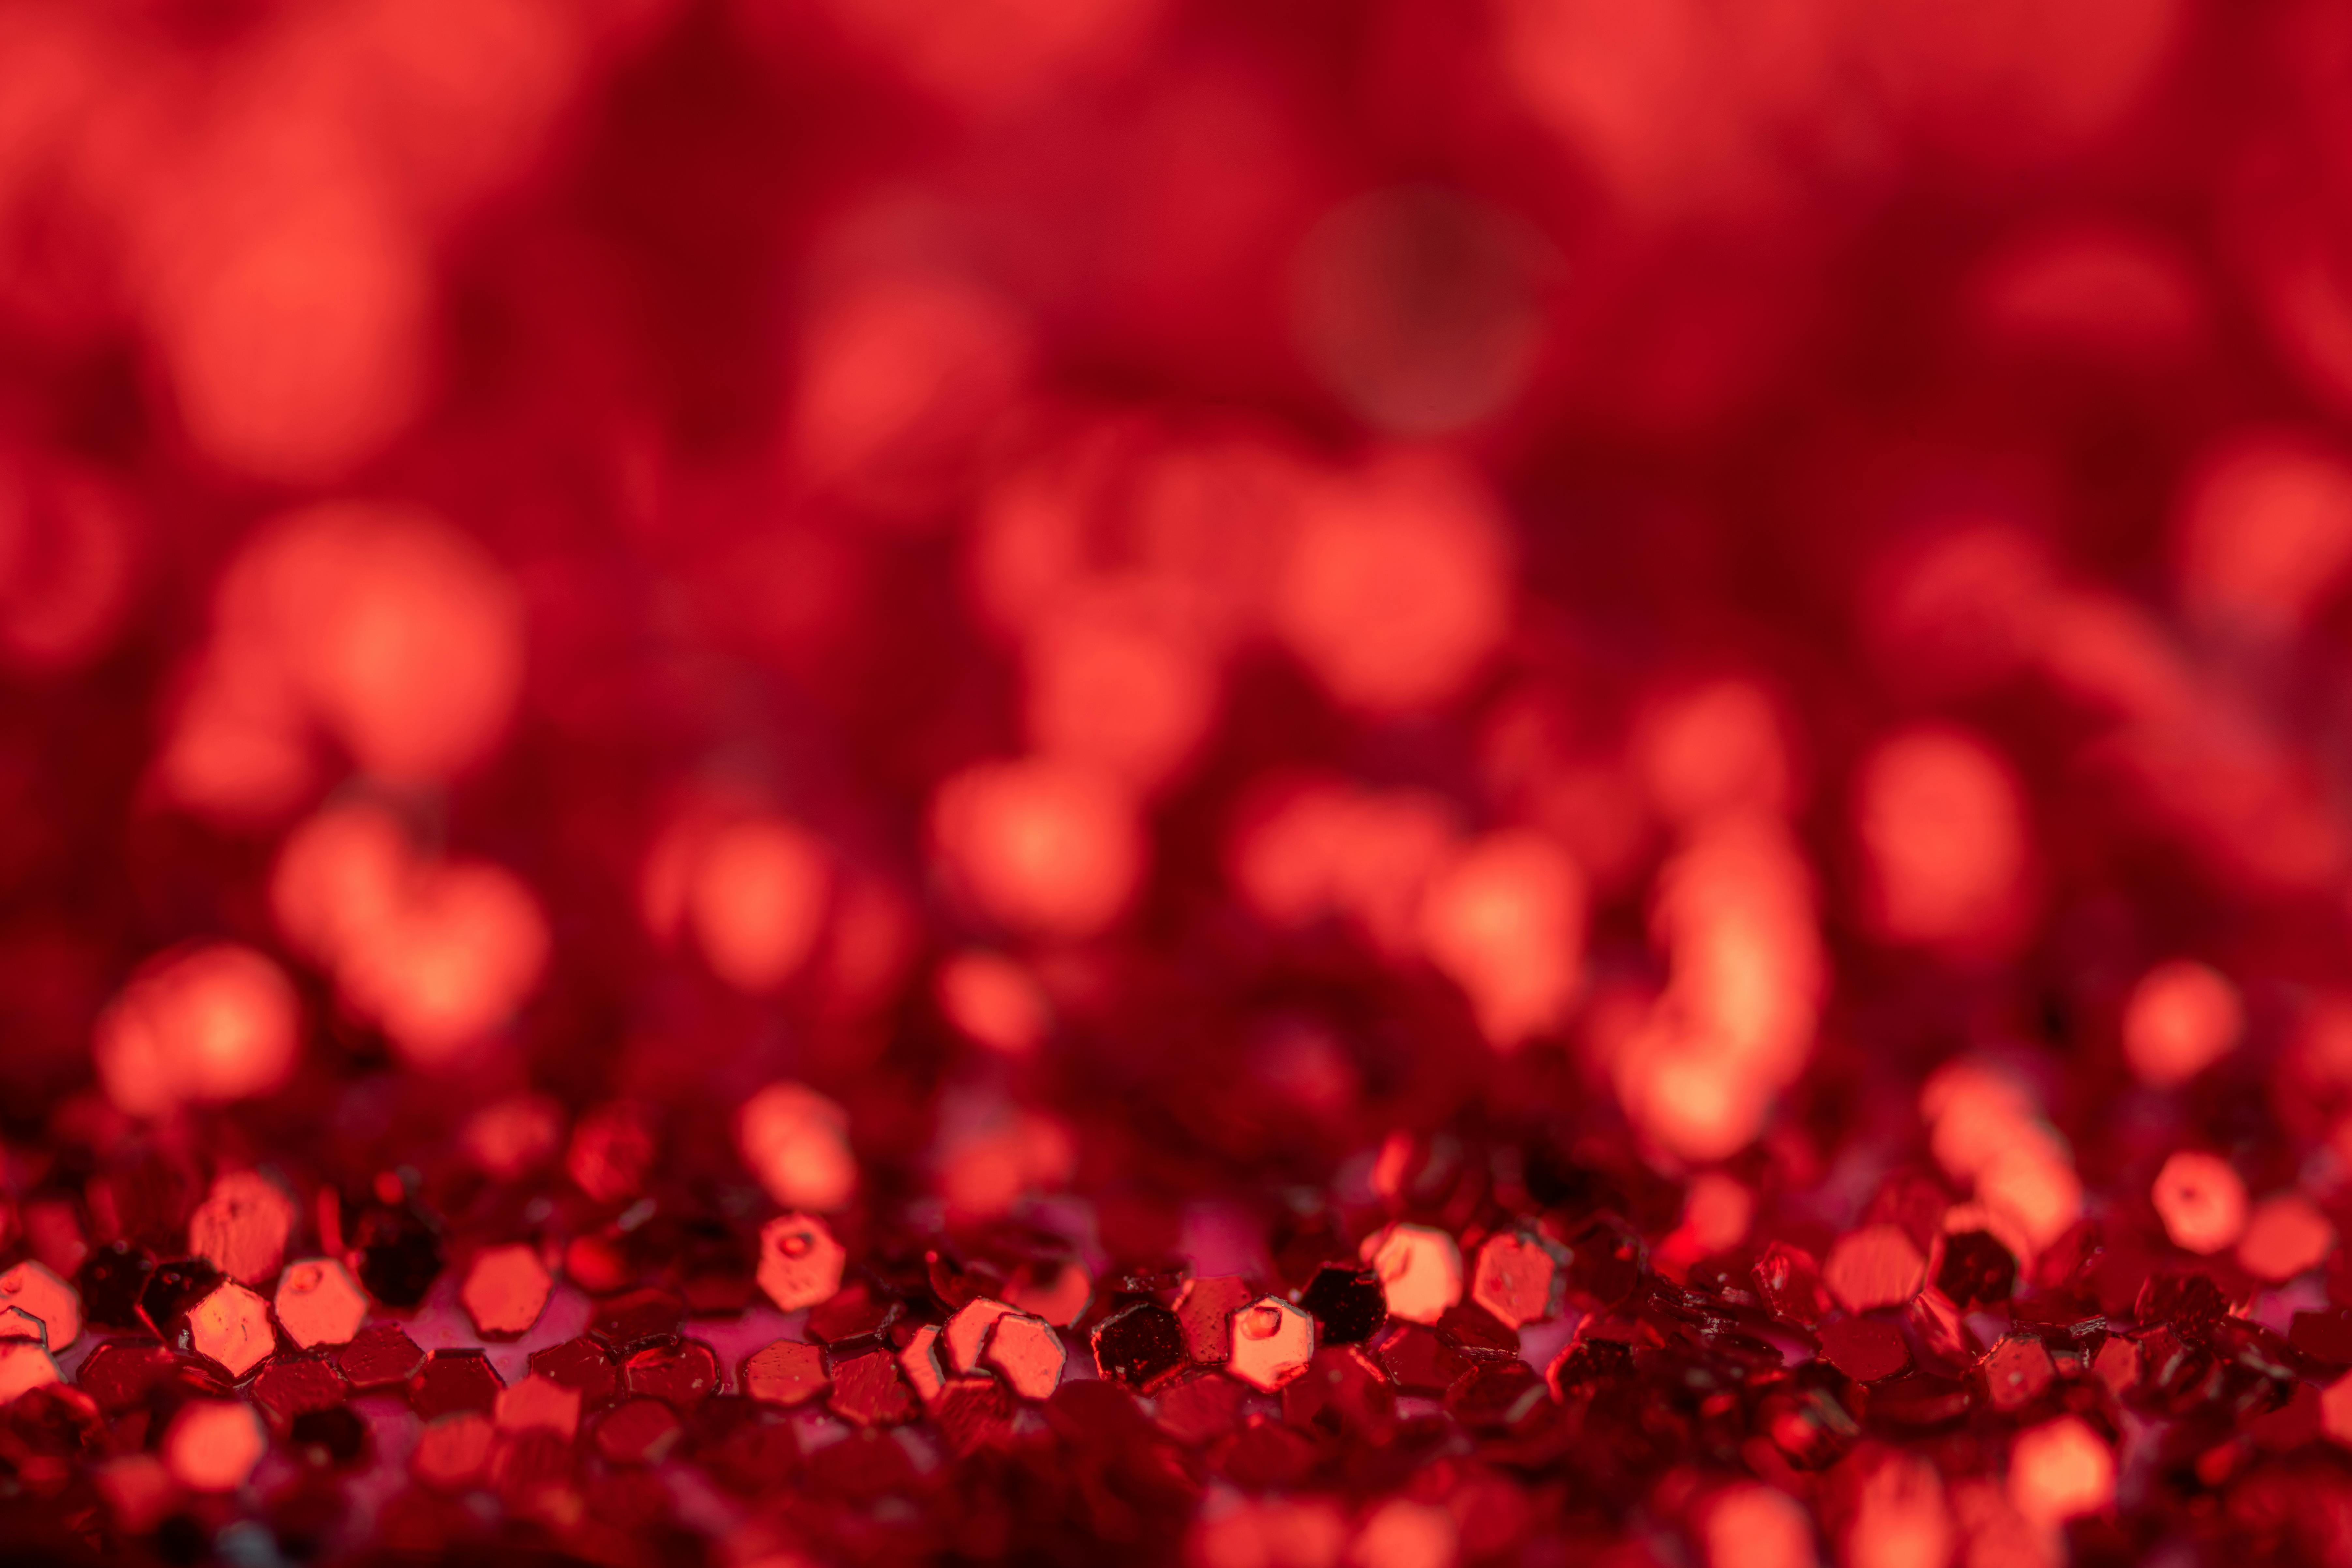 63,206 Red Sequins Images, Stock Photos, 3D objects, & Vectors